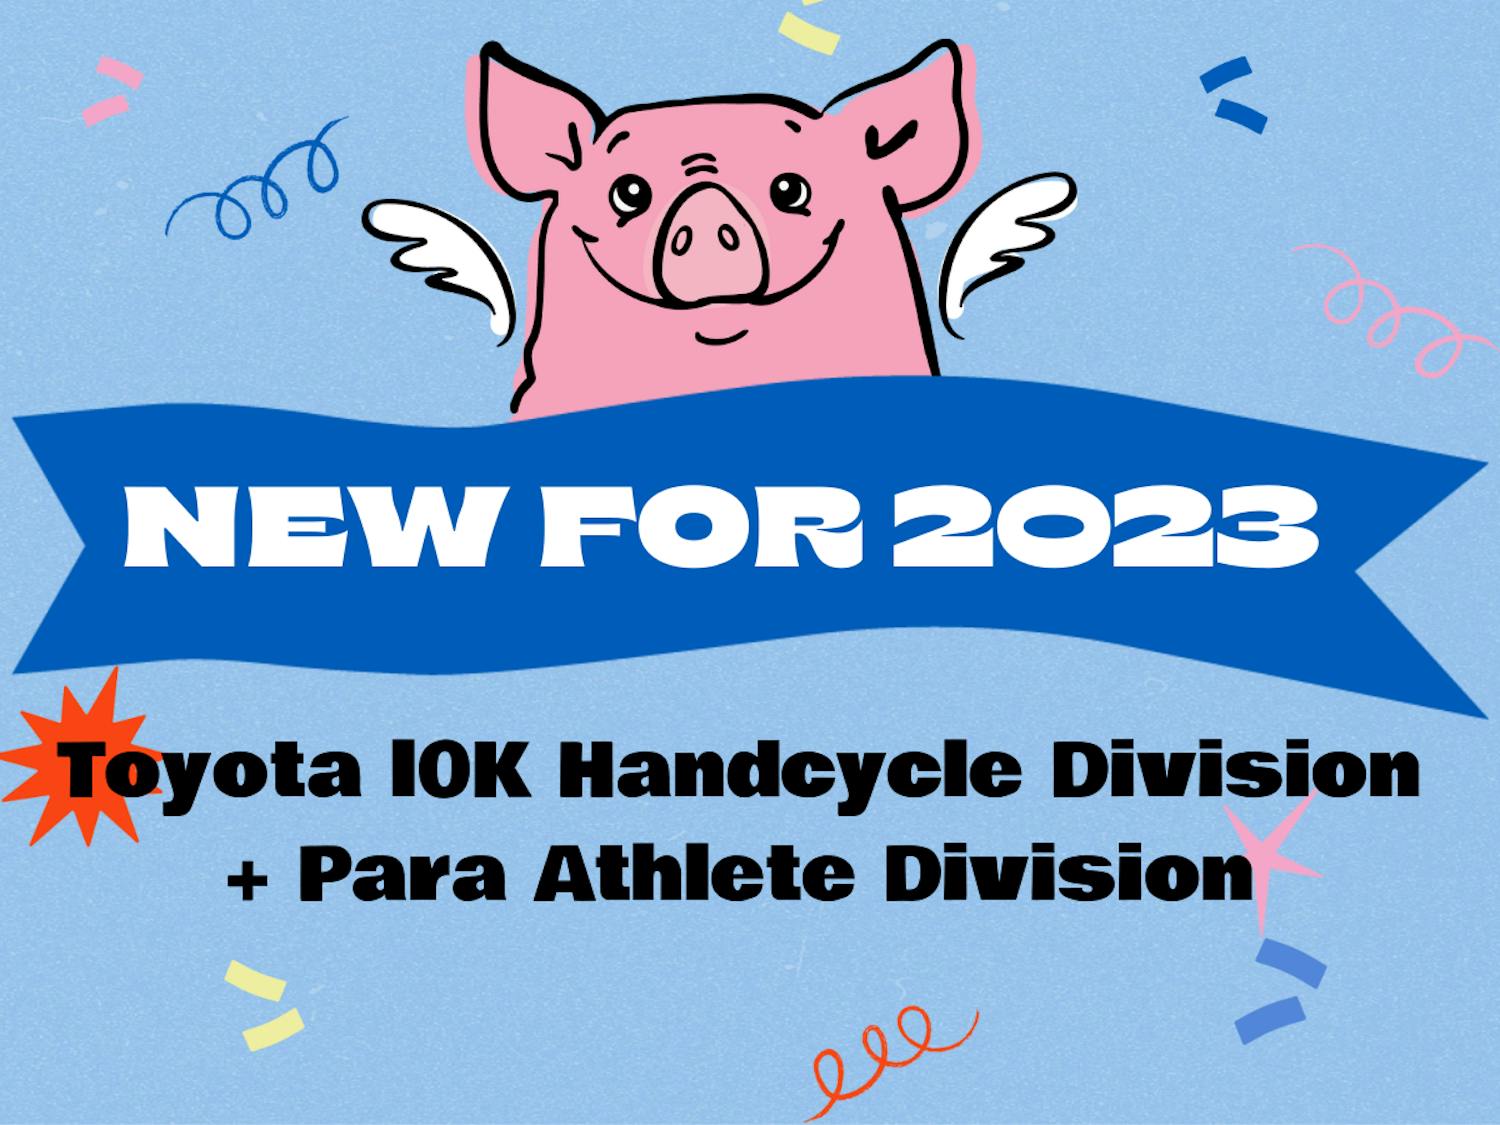 Flying Pig Marathon Weekend Adds Toyota 10K Handcycle Division  and Para Athlete Division for 2023 Event